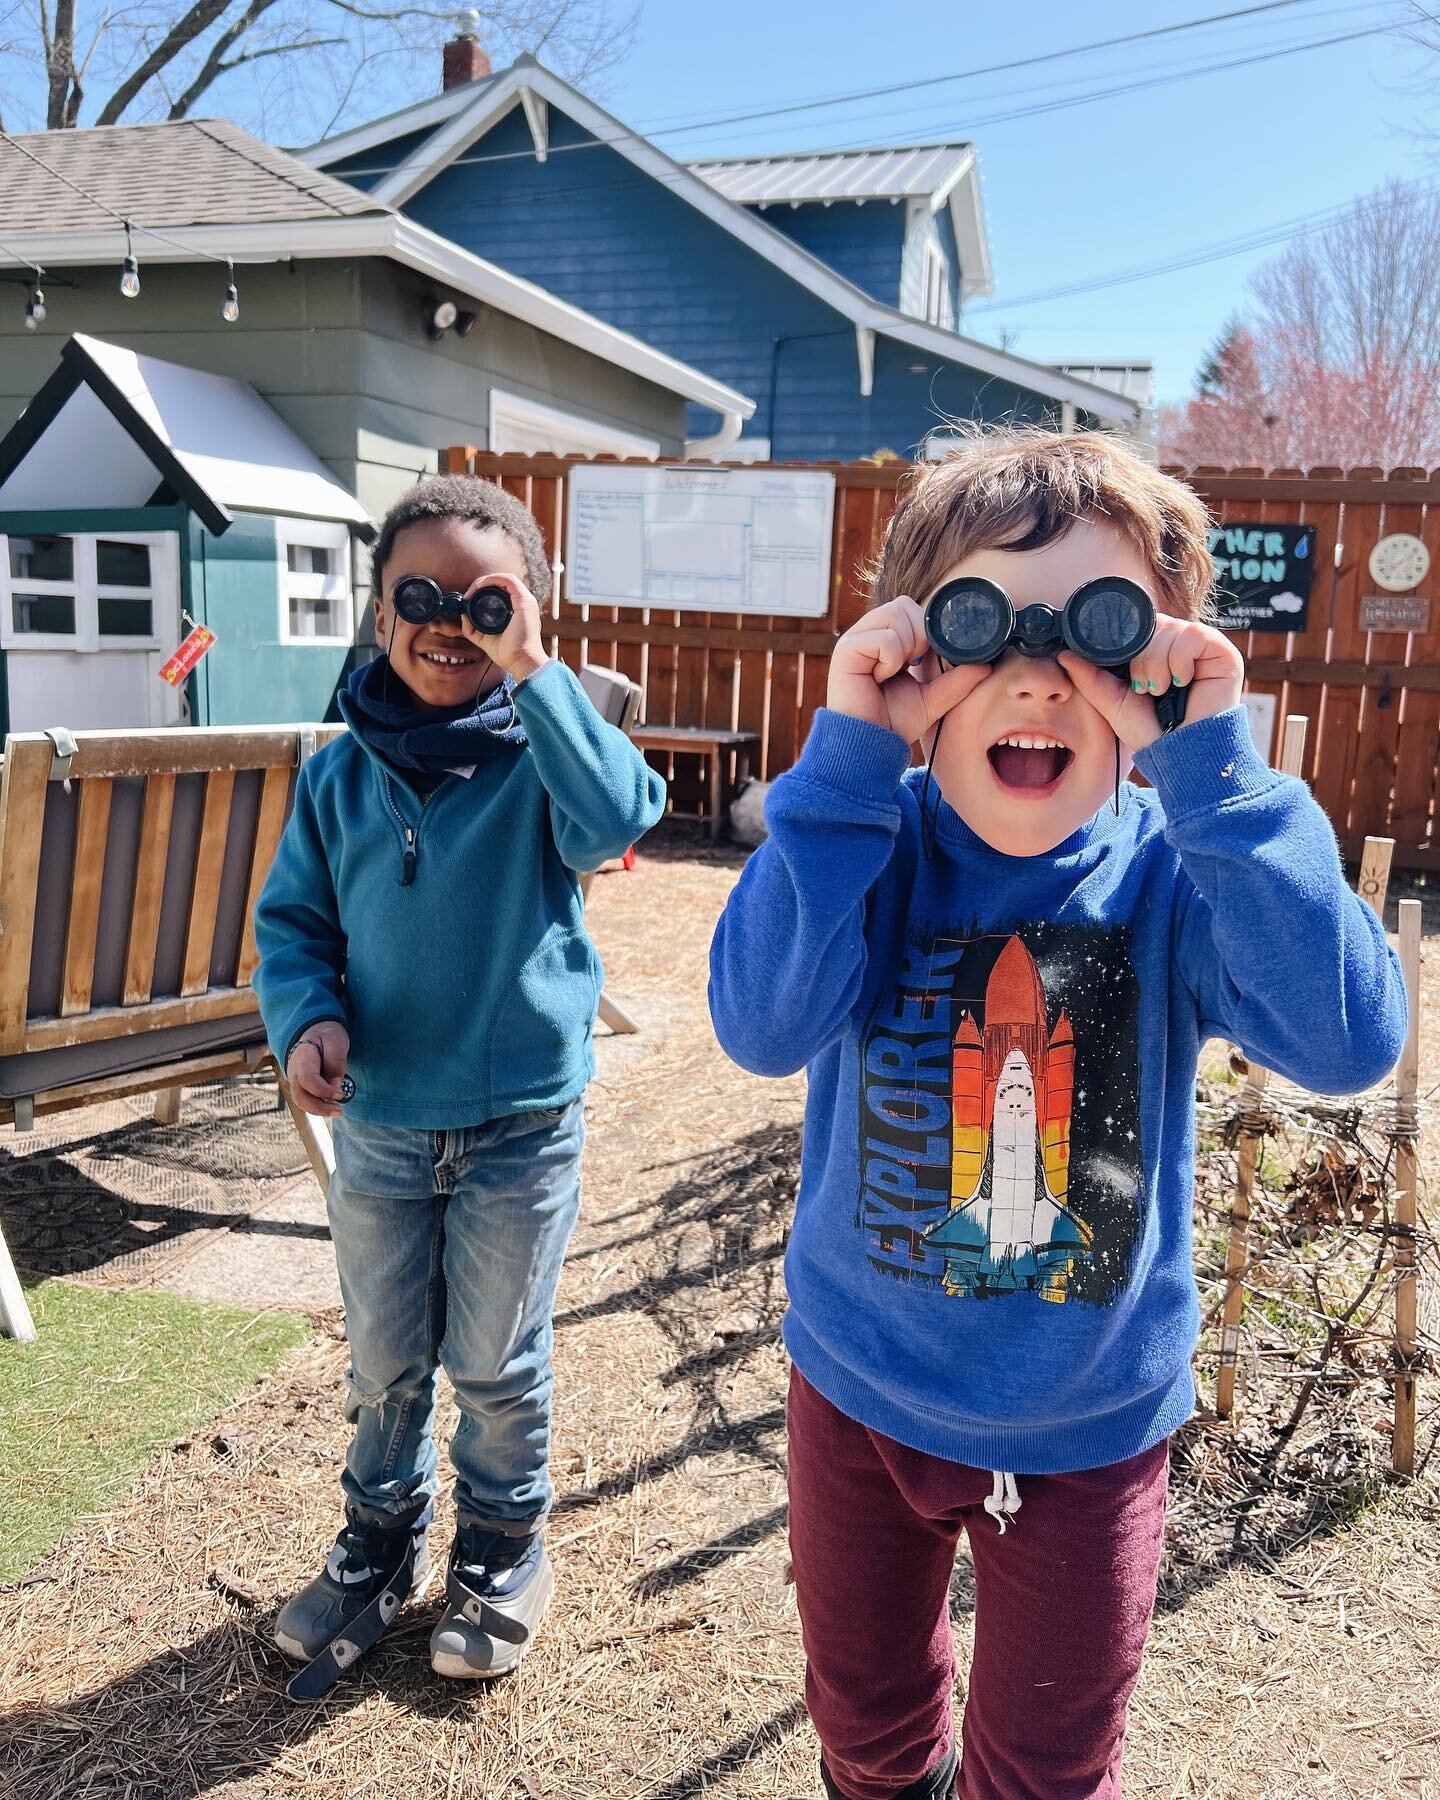 It&rsquo;s local birds week at Little Naturalists and our students have their binoculars and bird books out, ready to spot some Minnesota birds! We have hawks, eagles, blue jays, cardinals, ravens, chickadees, and many more that like to visit our out